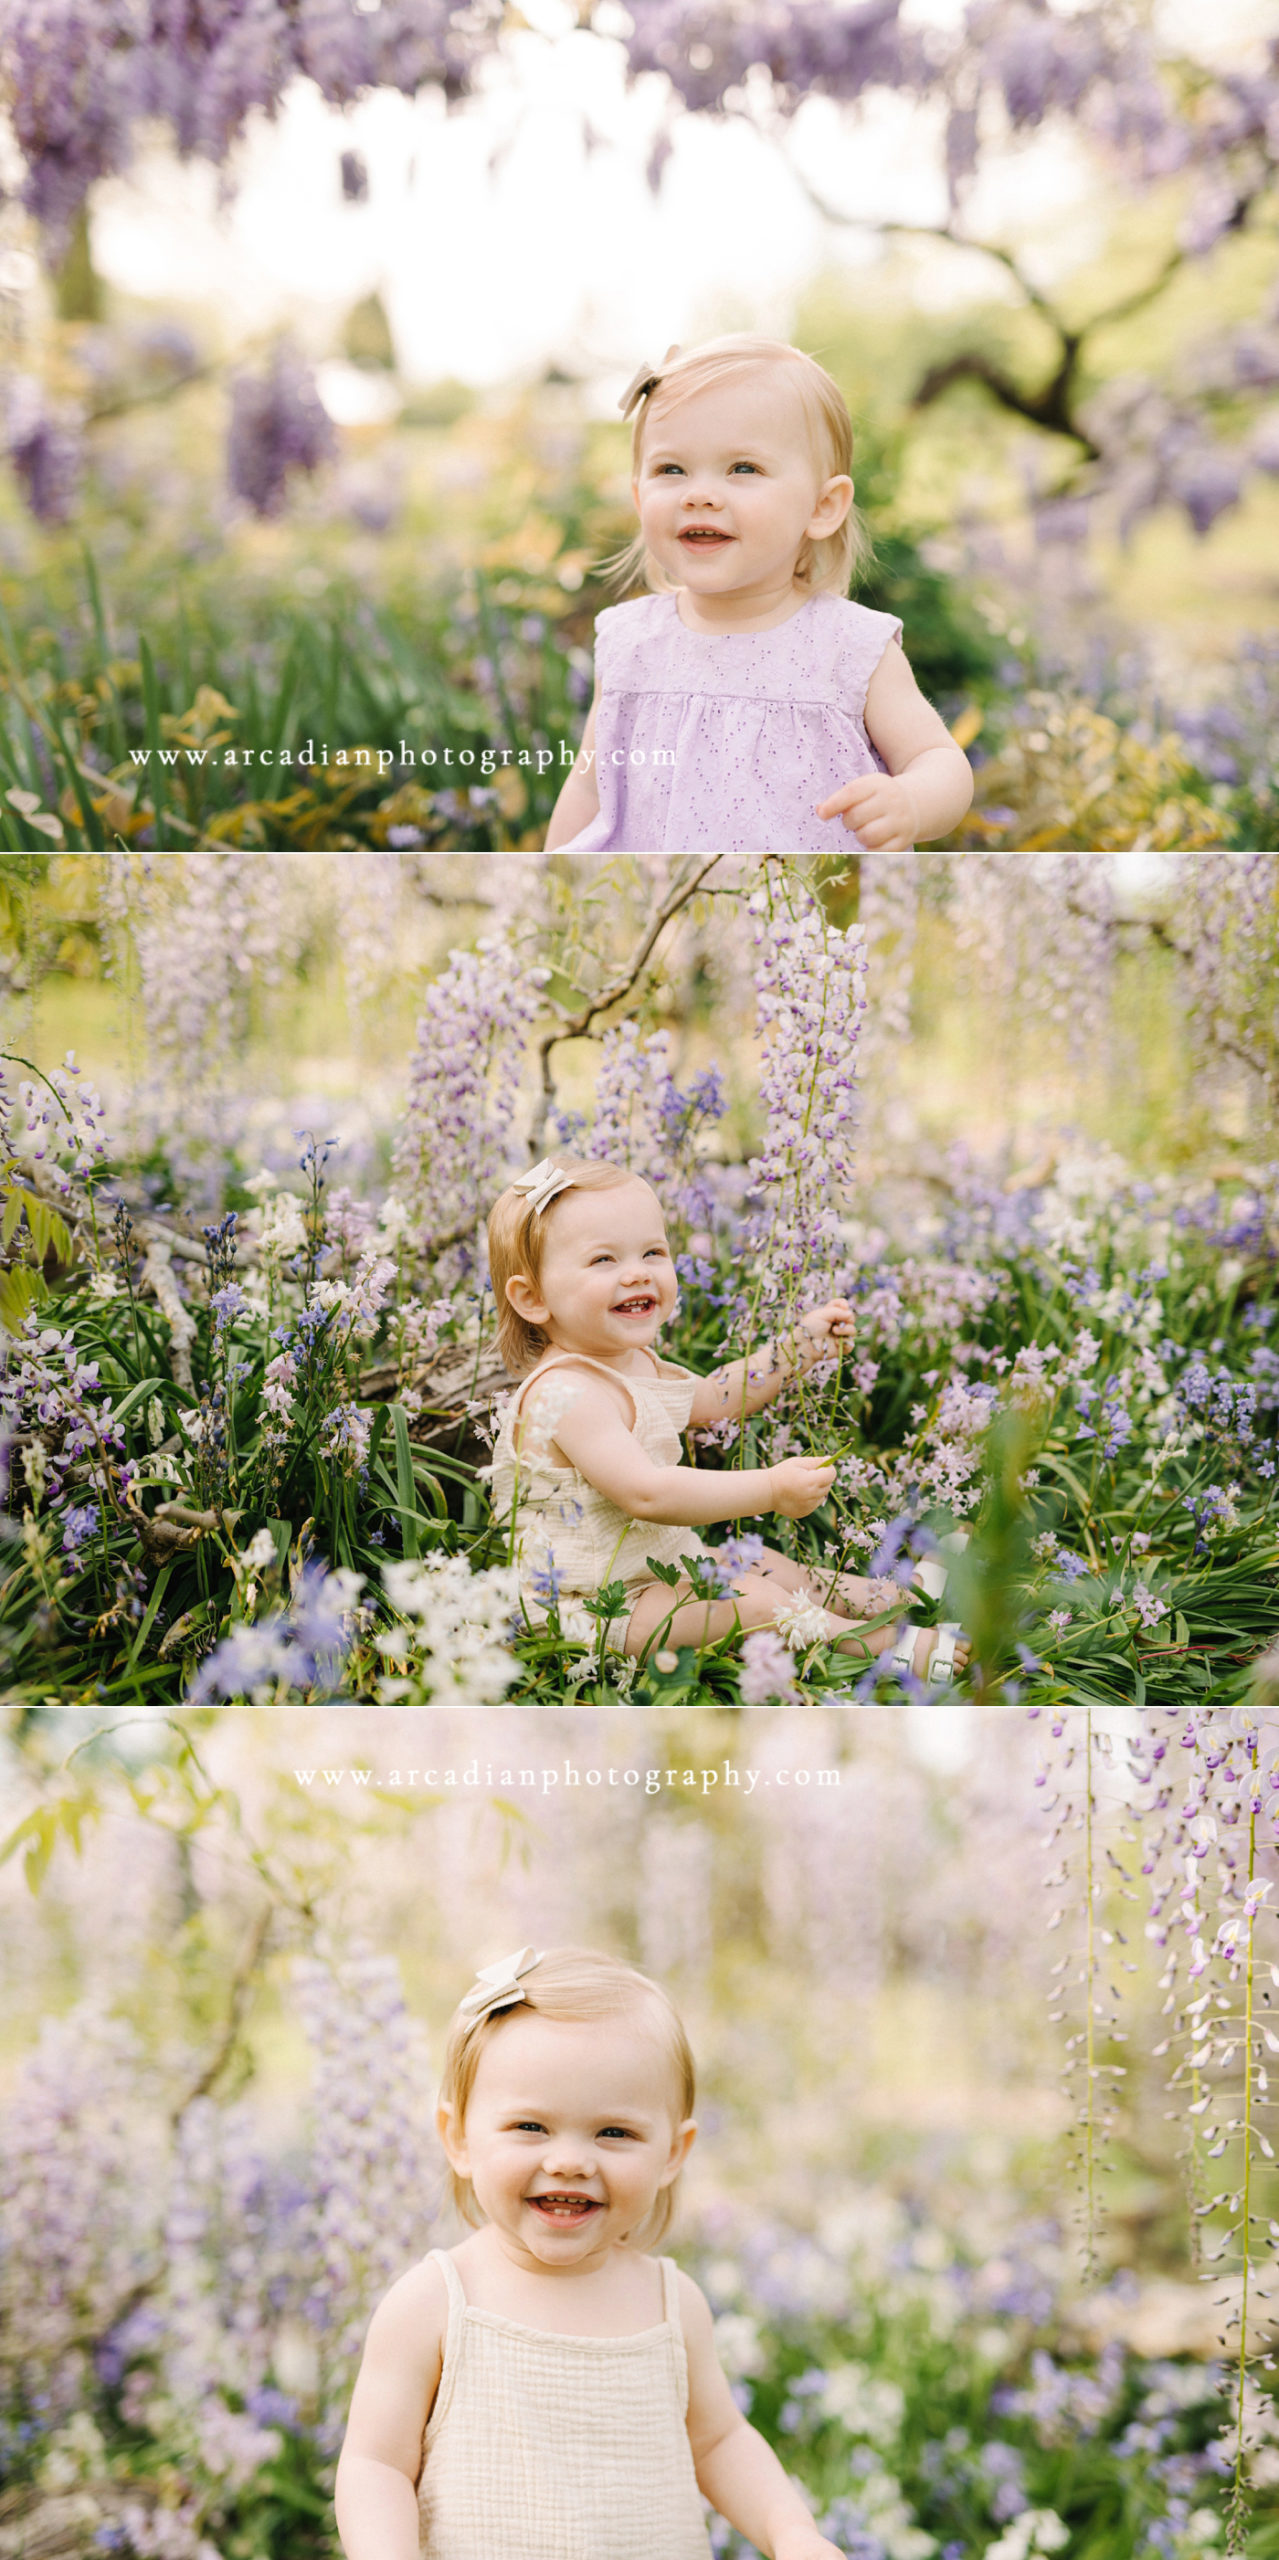 Outdoor spring one-year photos at the wisteria in Bush Park